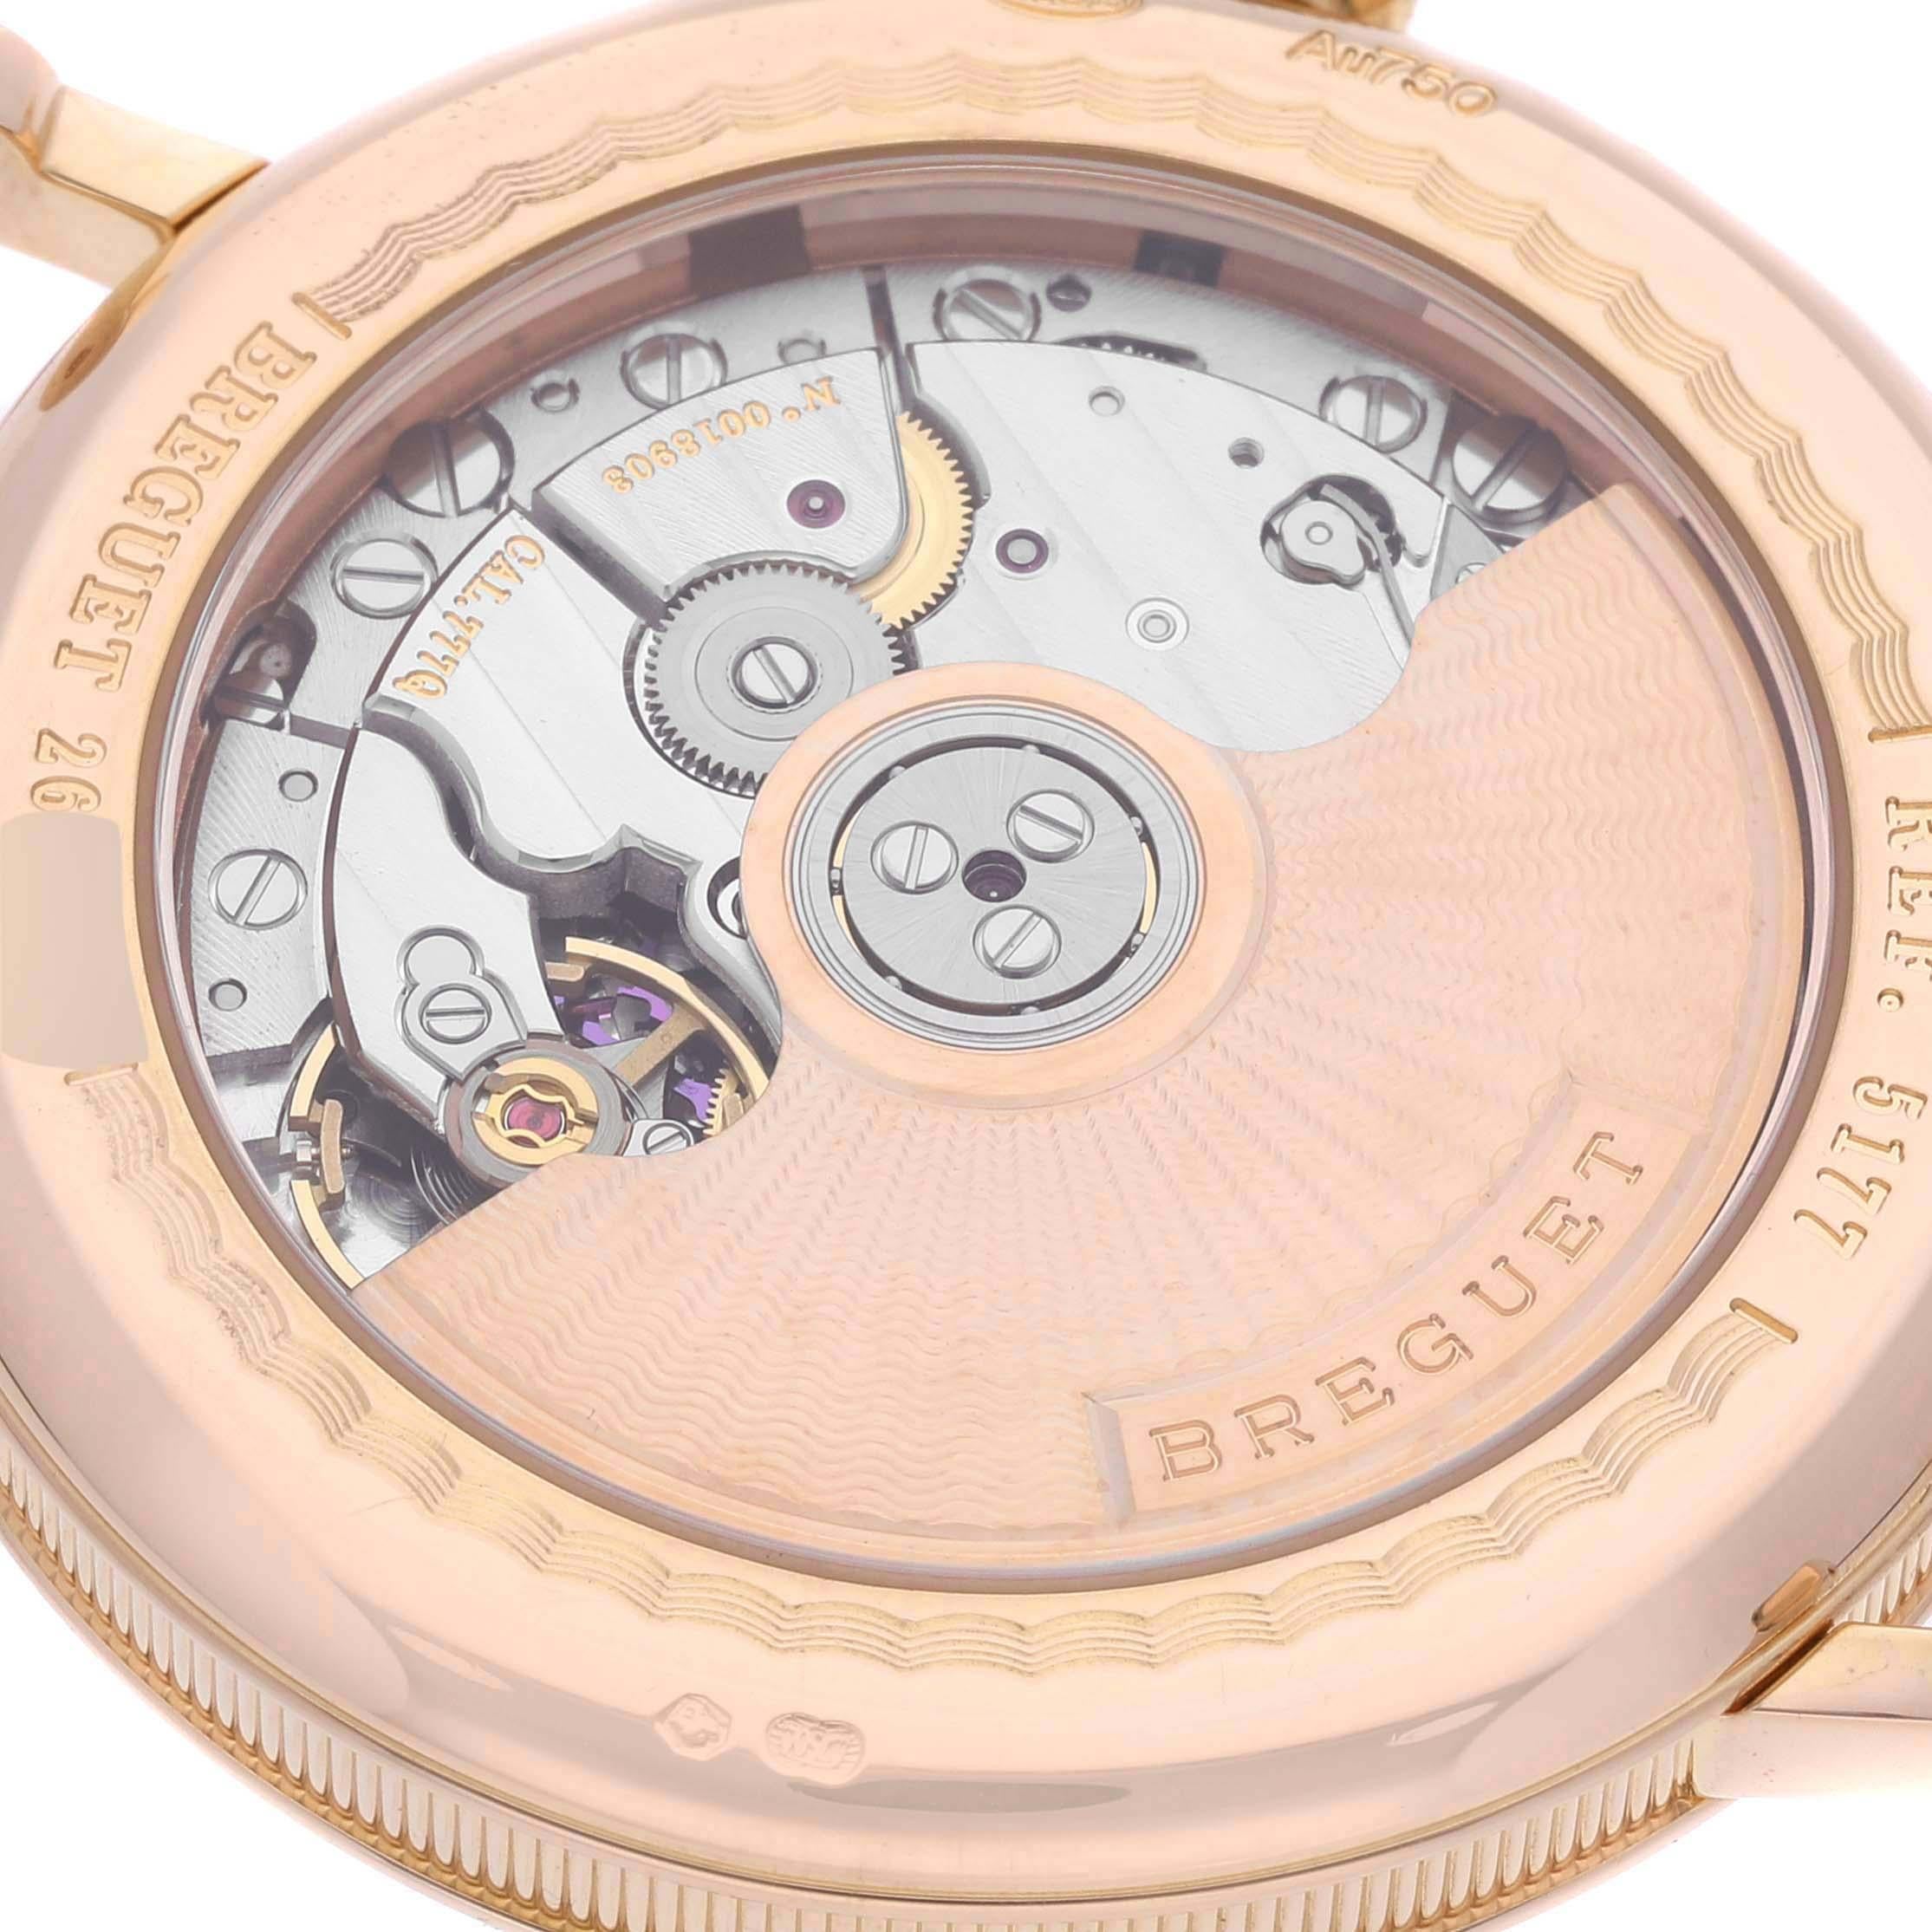 Breguet Classique Rose Gold Silver Dial Mens Watch 5177 In Excellent Condition For Sale In Atlanta, GA